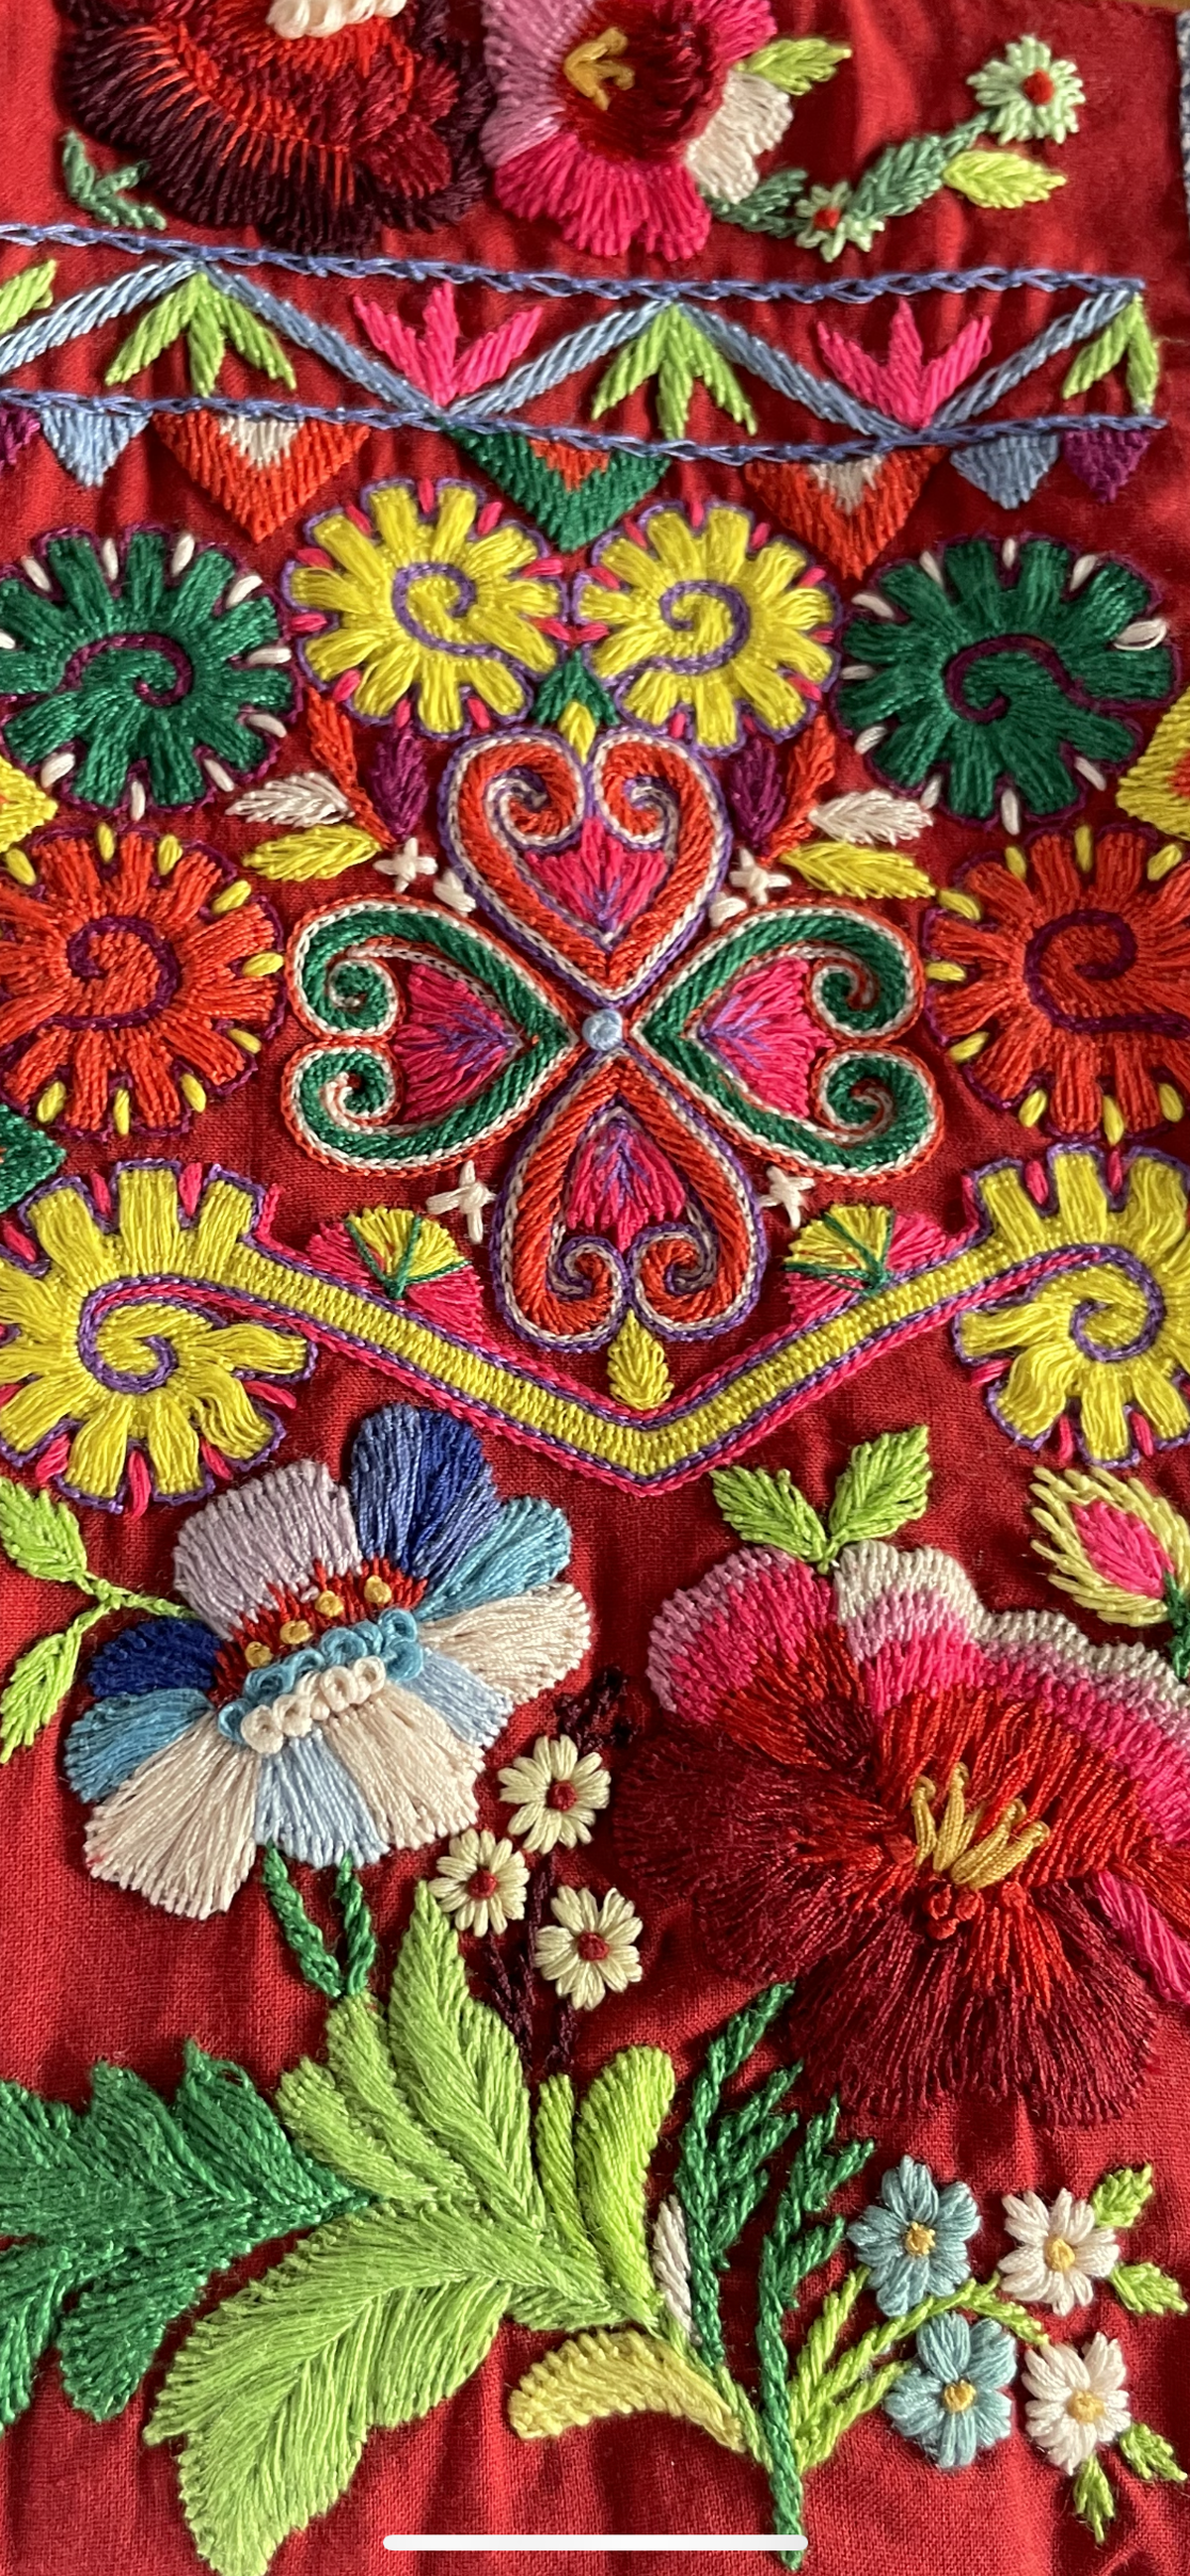 A closeup of the embroidery 